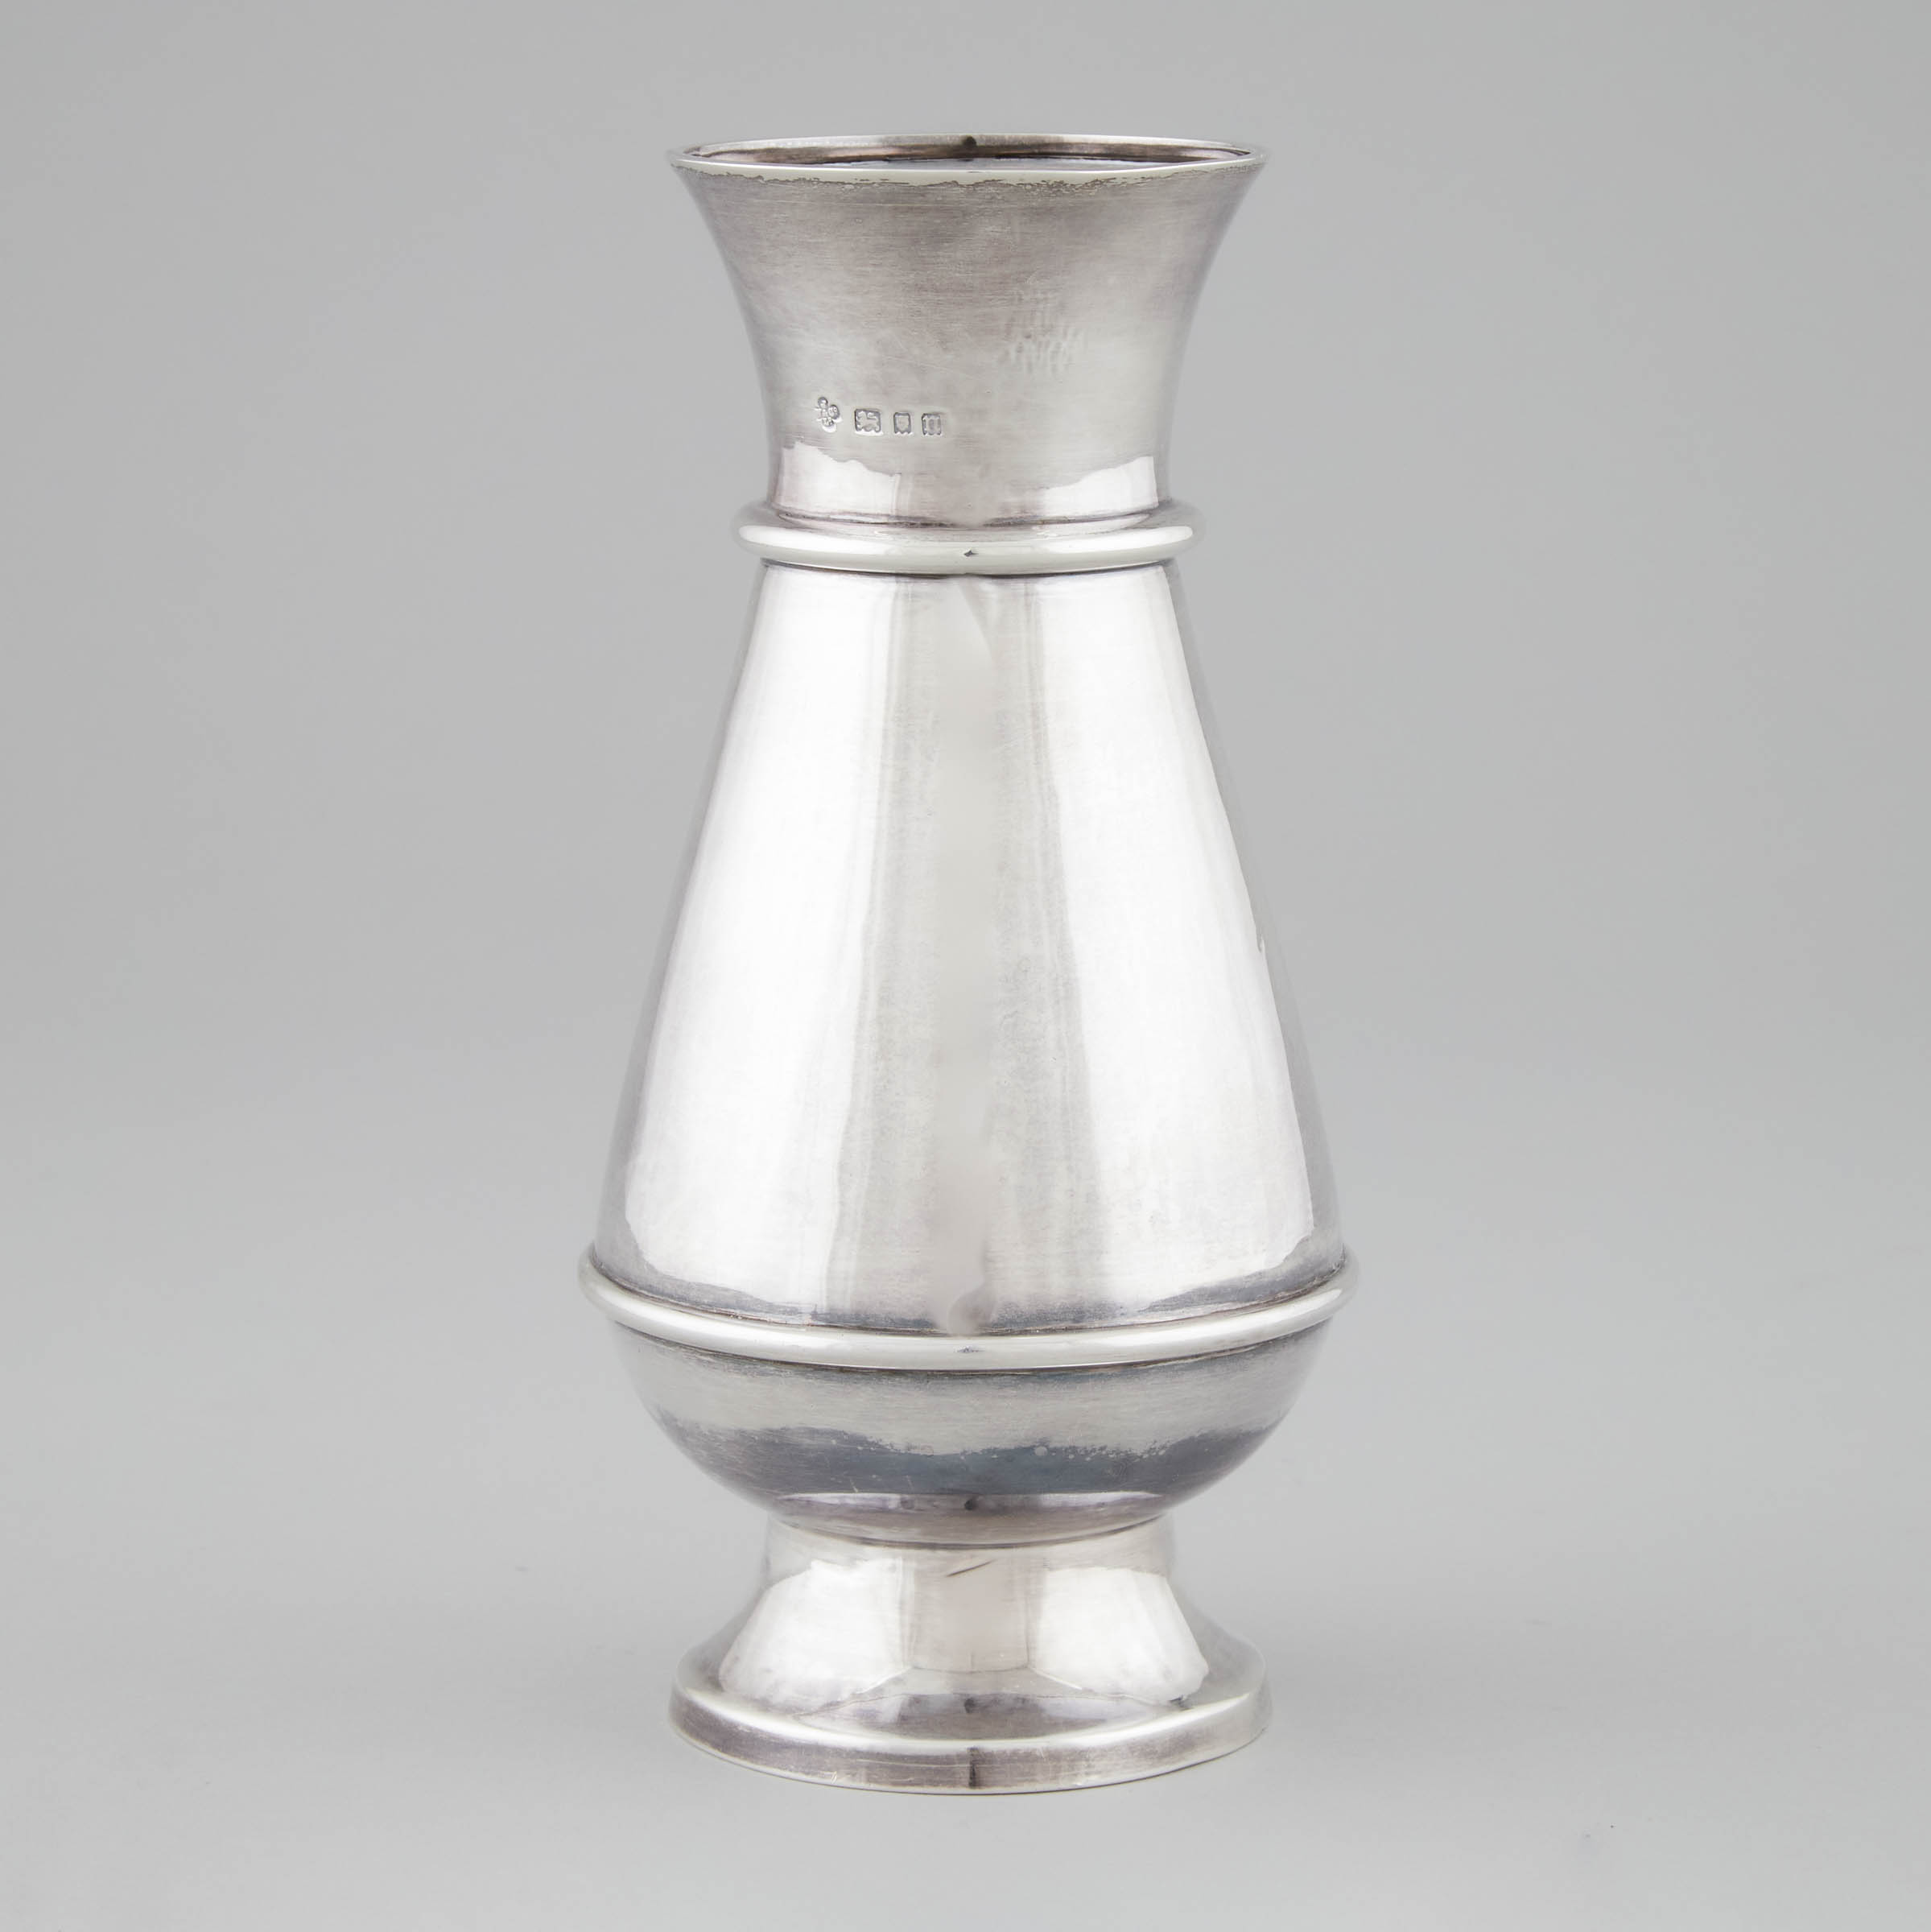 English Silver Vase J Wippell 3aabfa